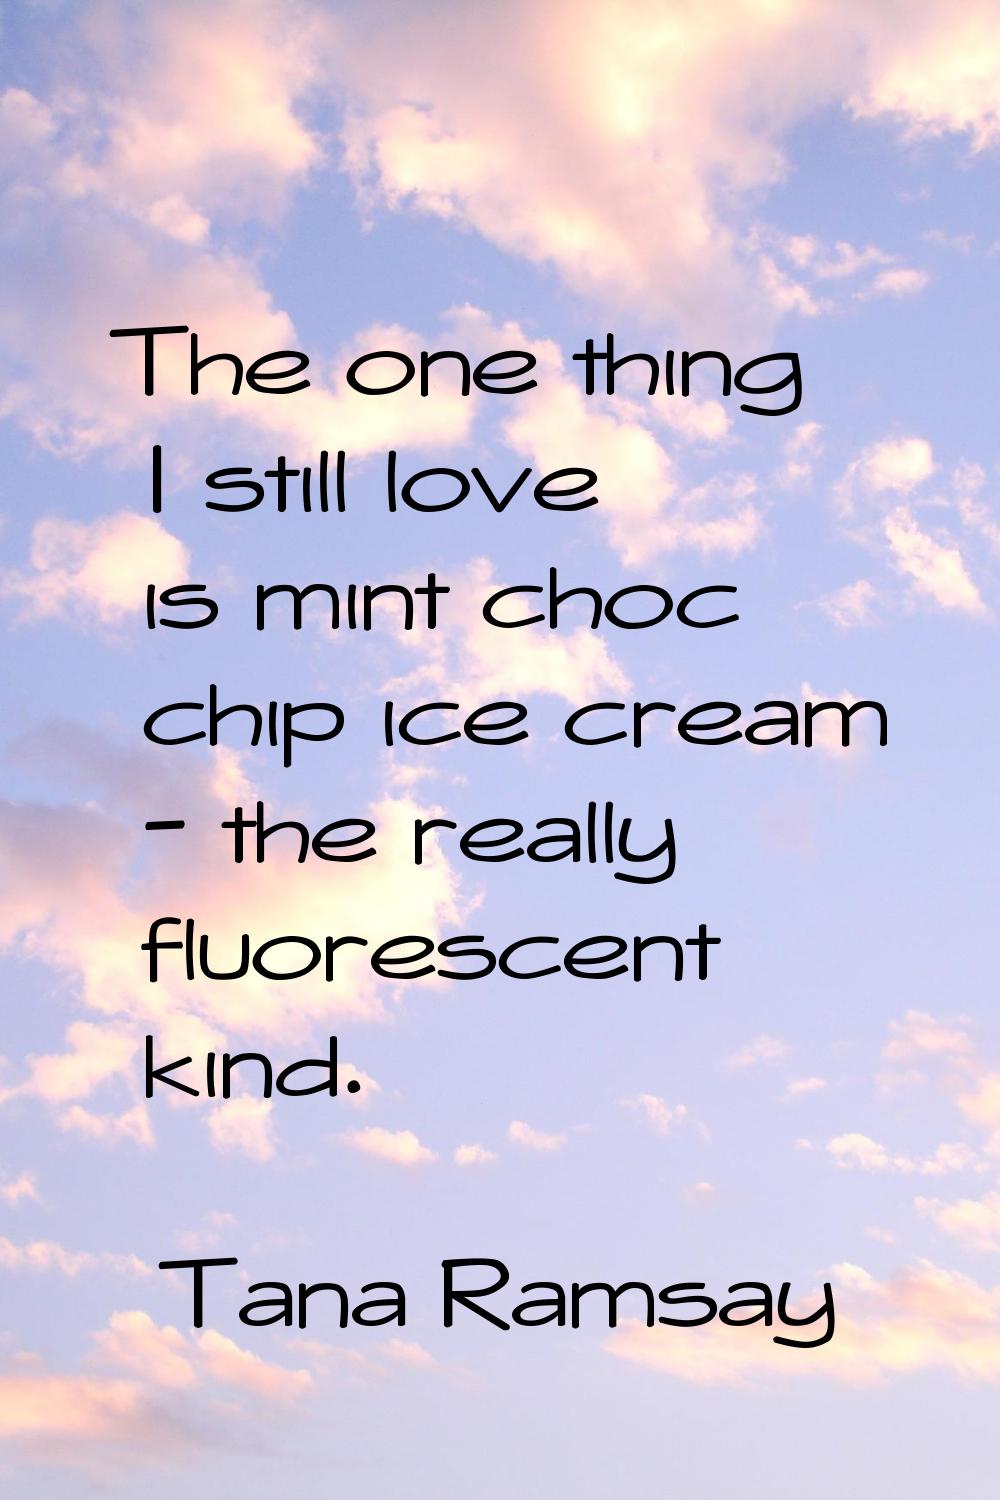 The one thing I still love is mint choc chip ice cream - the really fluorescent kind.